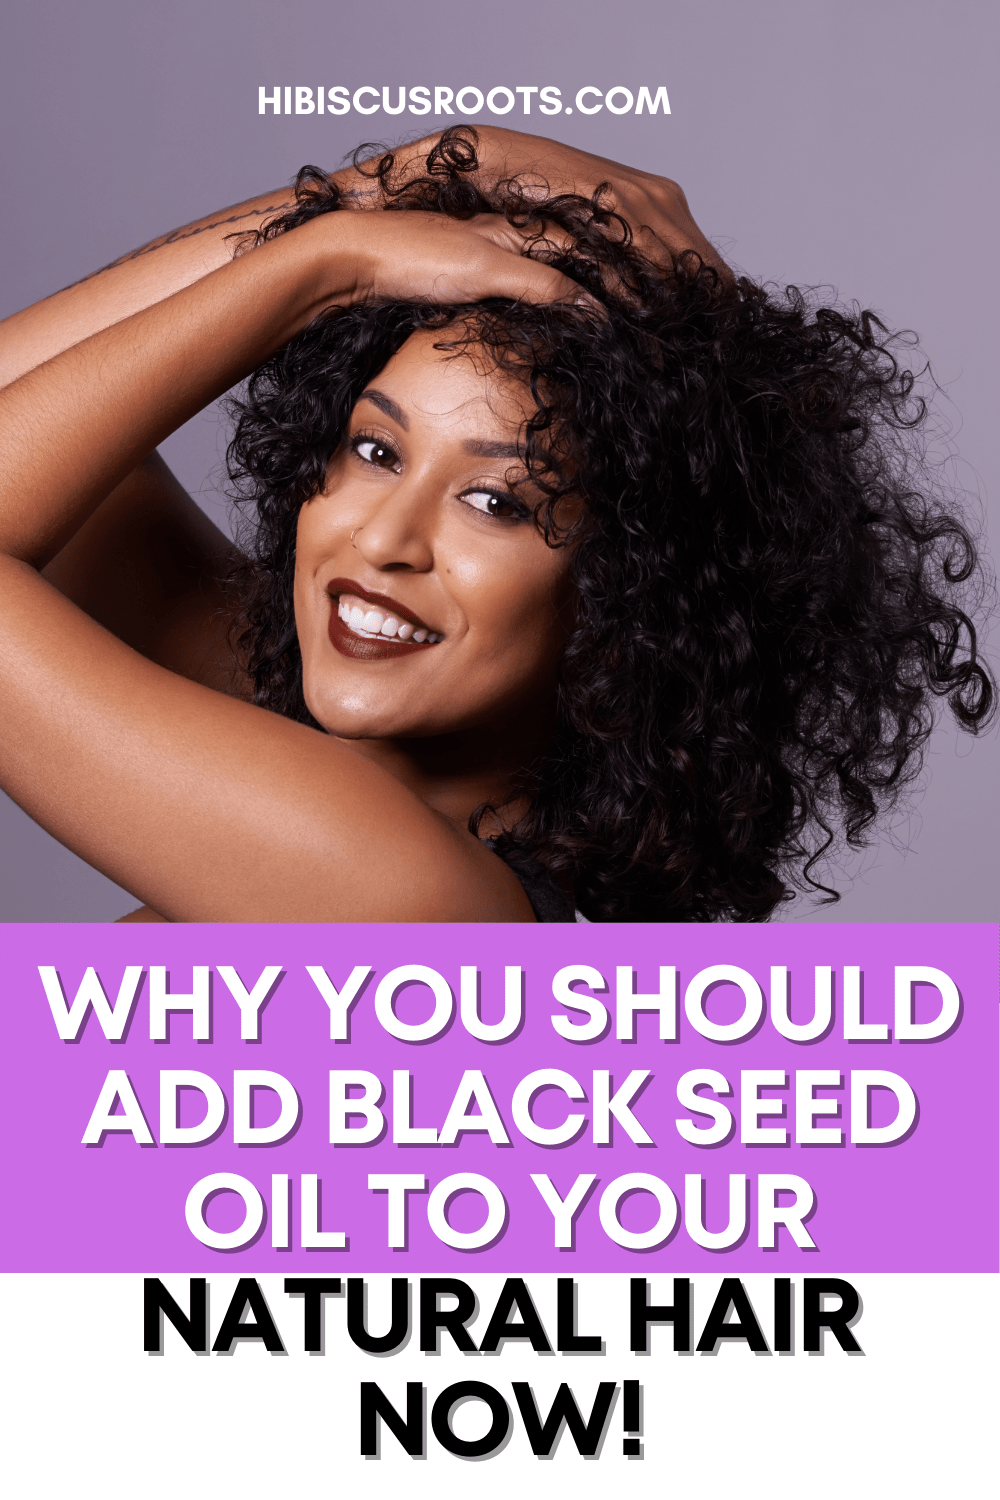 The Benefits of Black Seed Oil for Natural Hair!